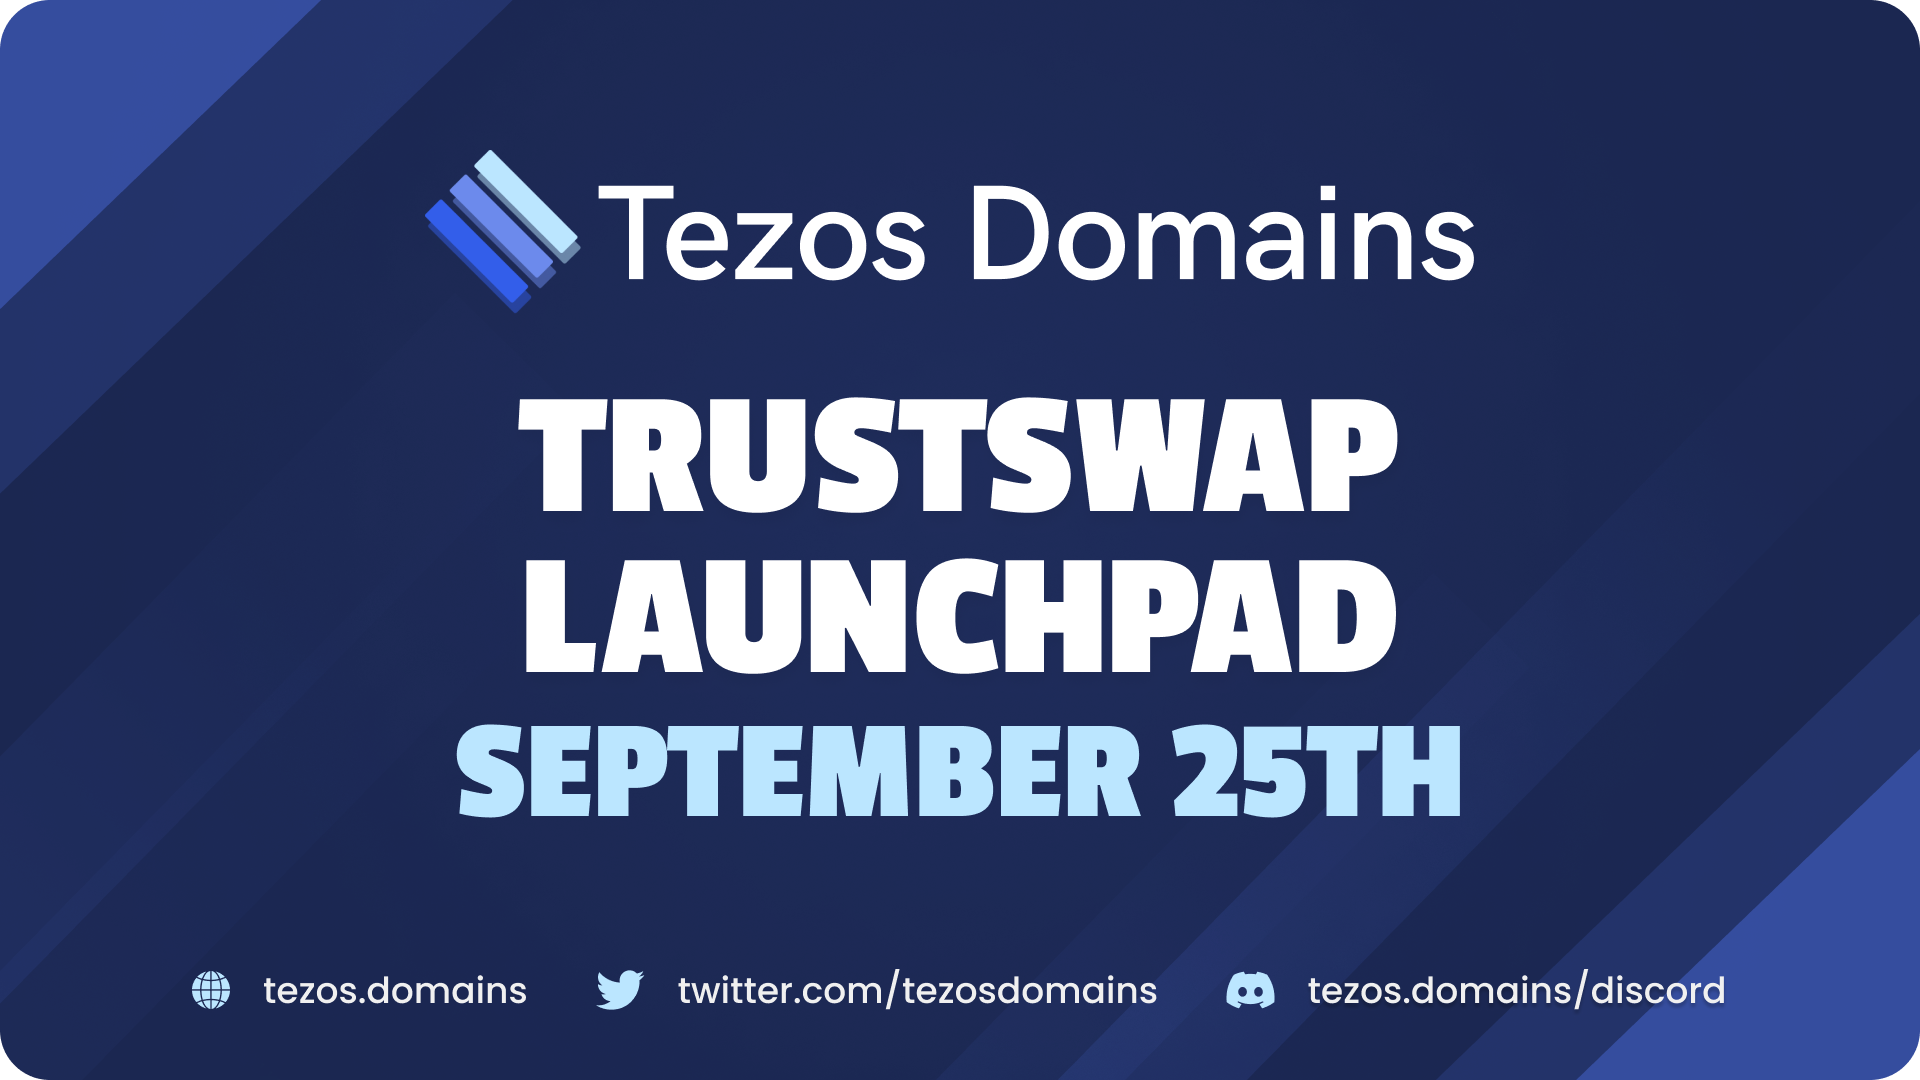 Tezos Domains Announces Sept. 25th Token Offering on TrustSwap Launchpad